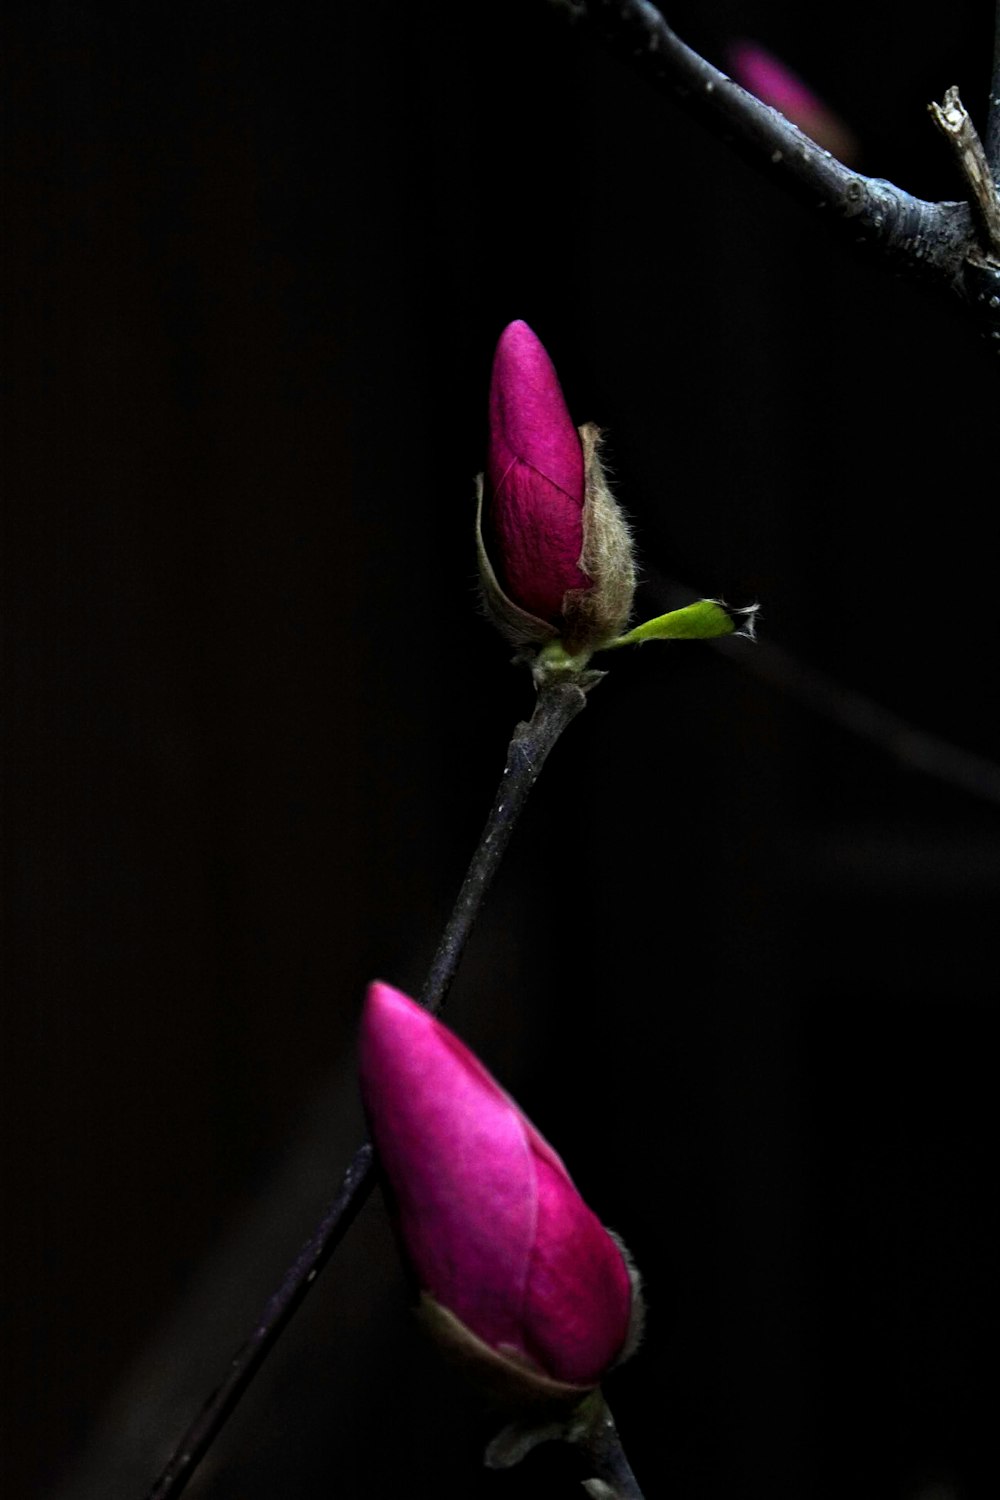 purple flower bud in close up photography